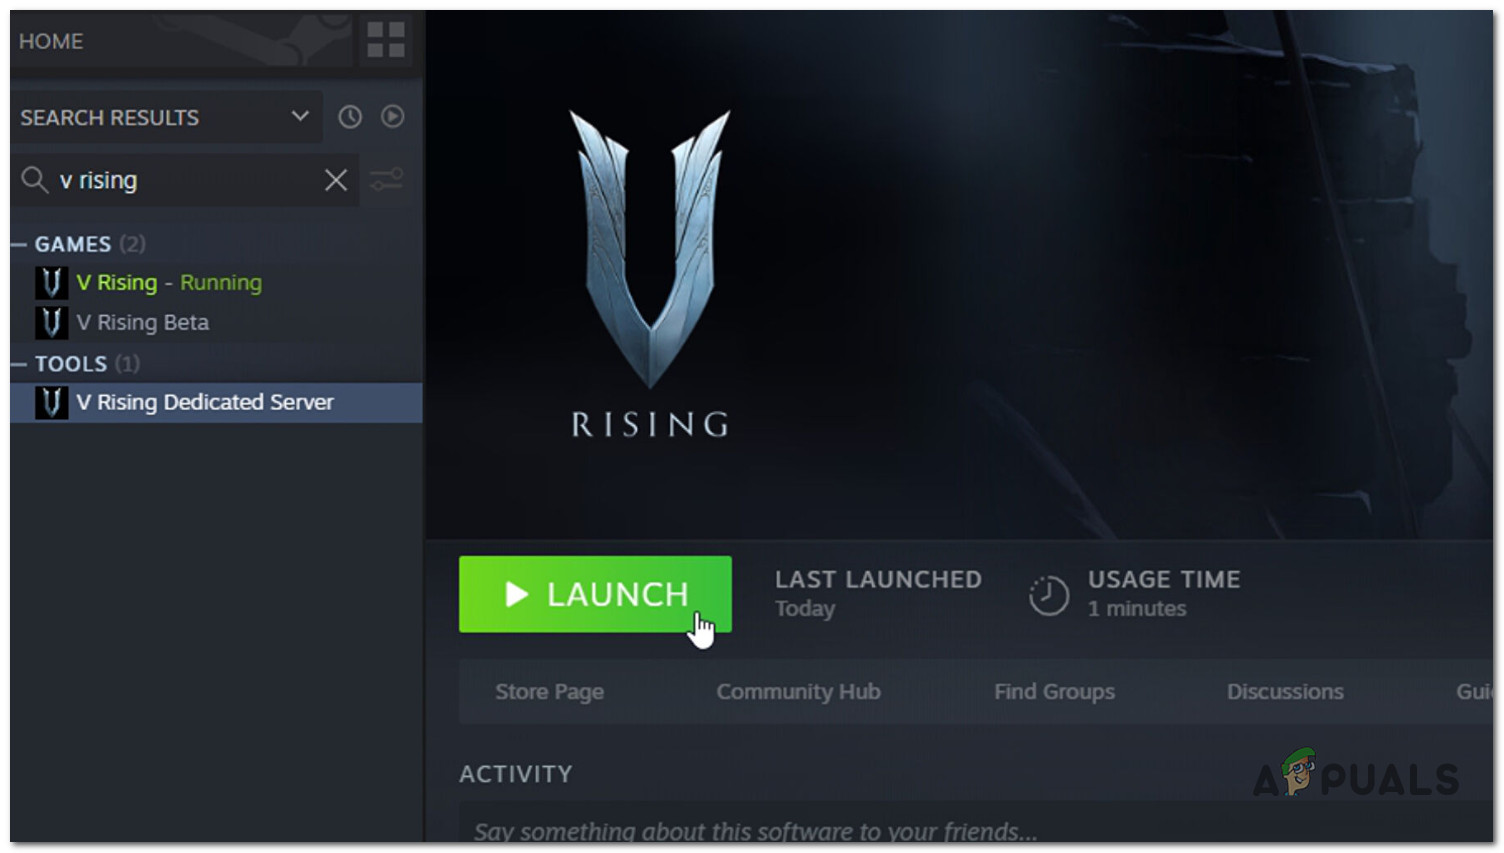 Re-launching the game 